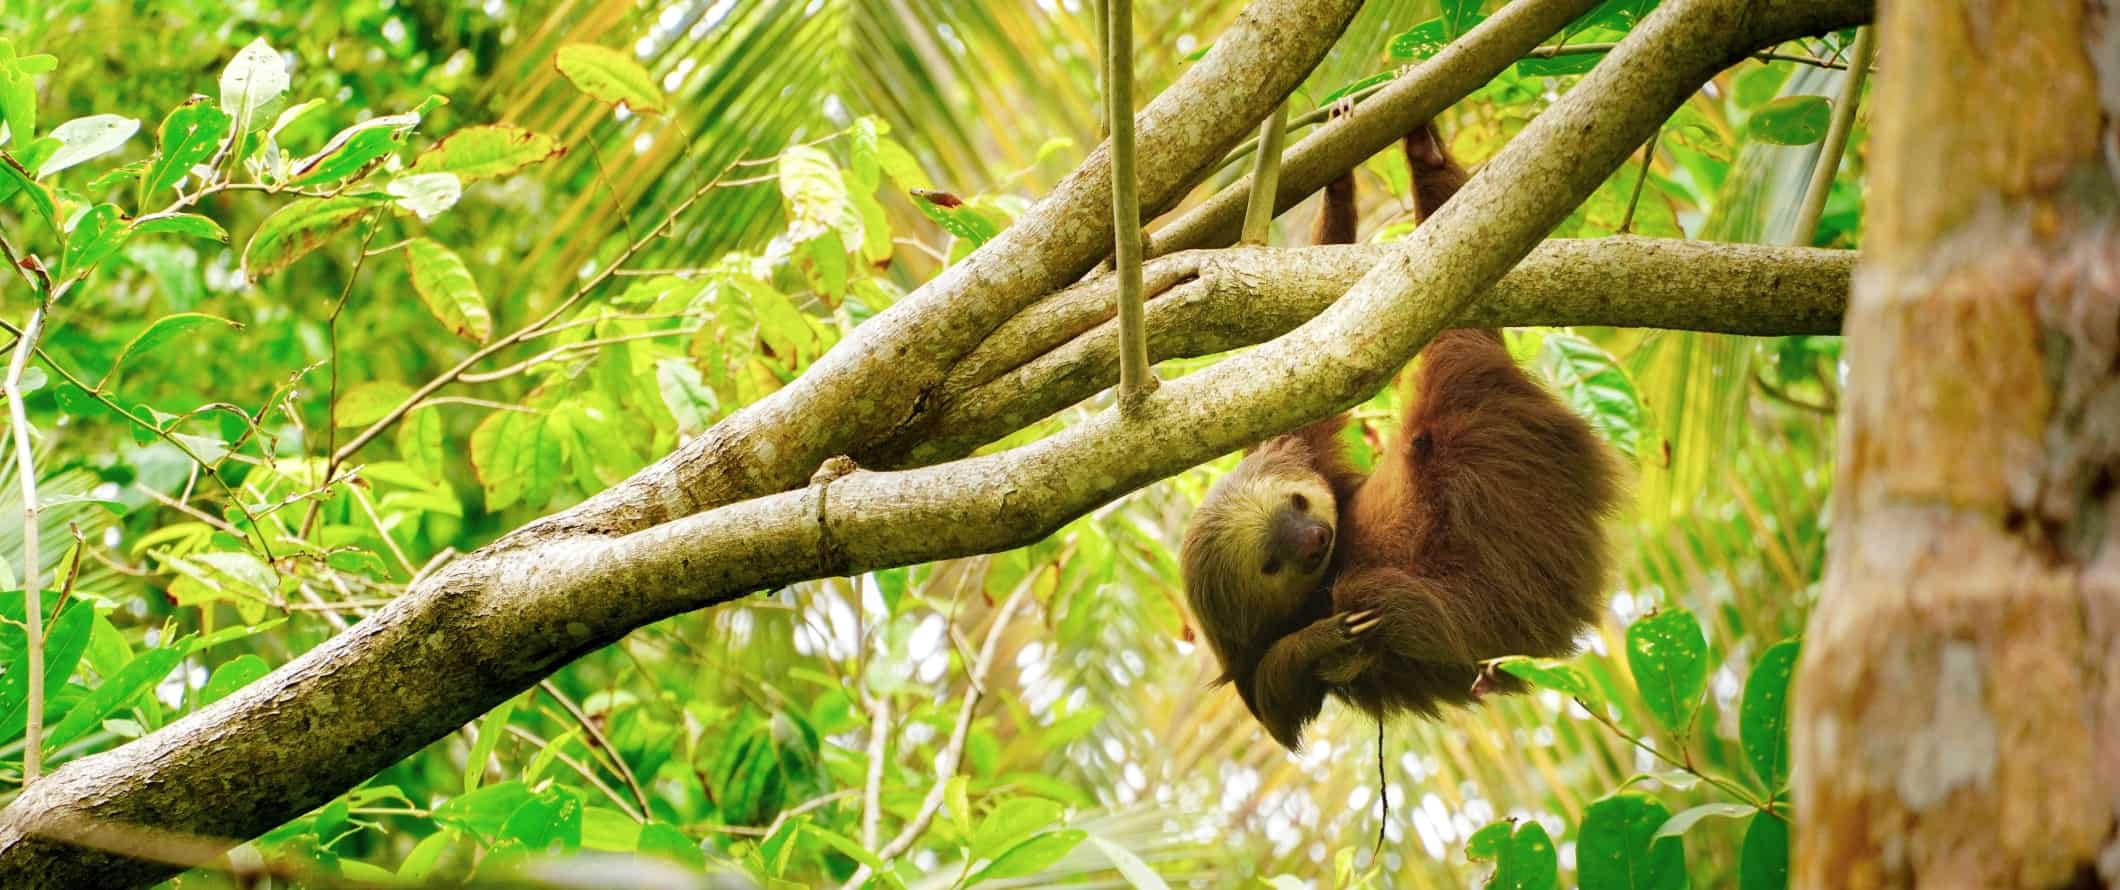 Sloth hanging from a tree in Cahuita National Park, Costa Rica